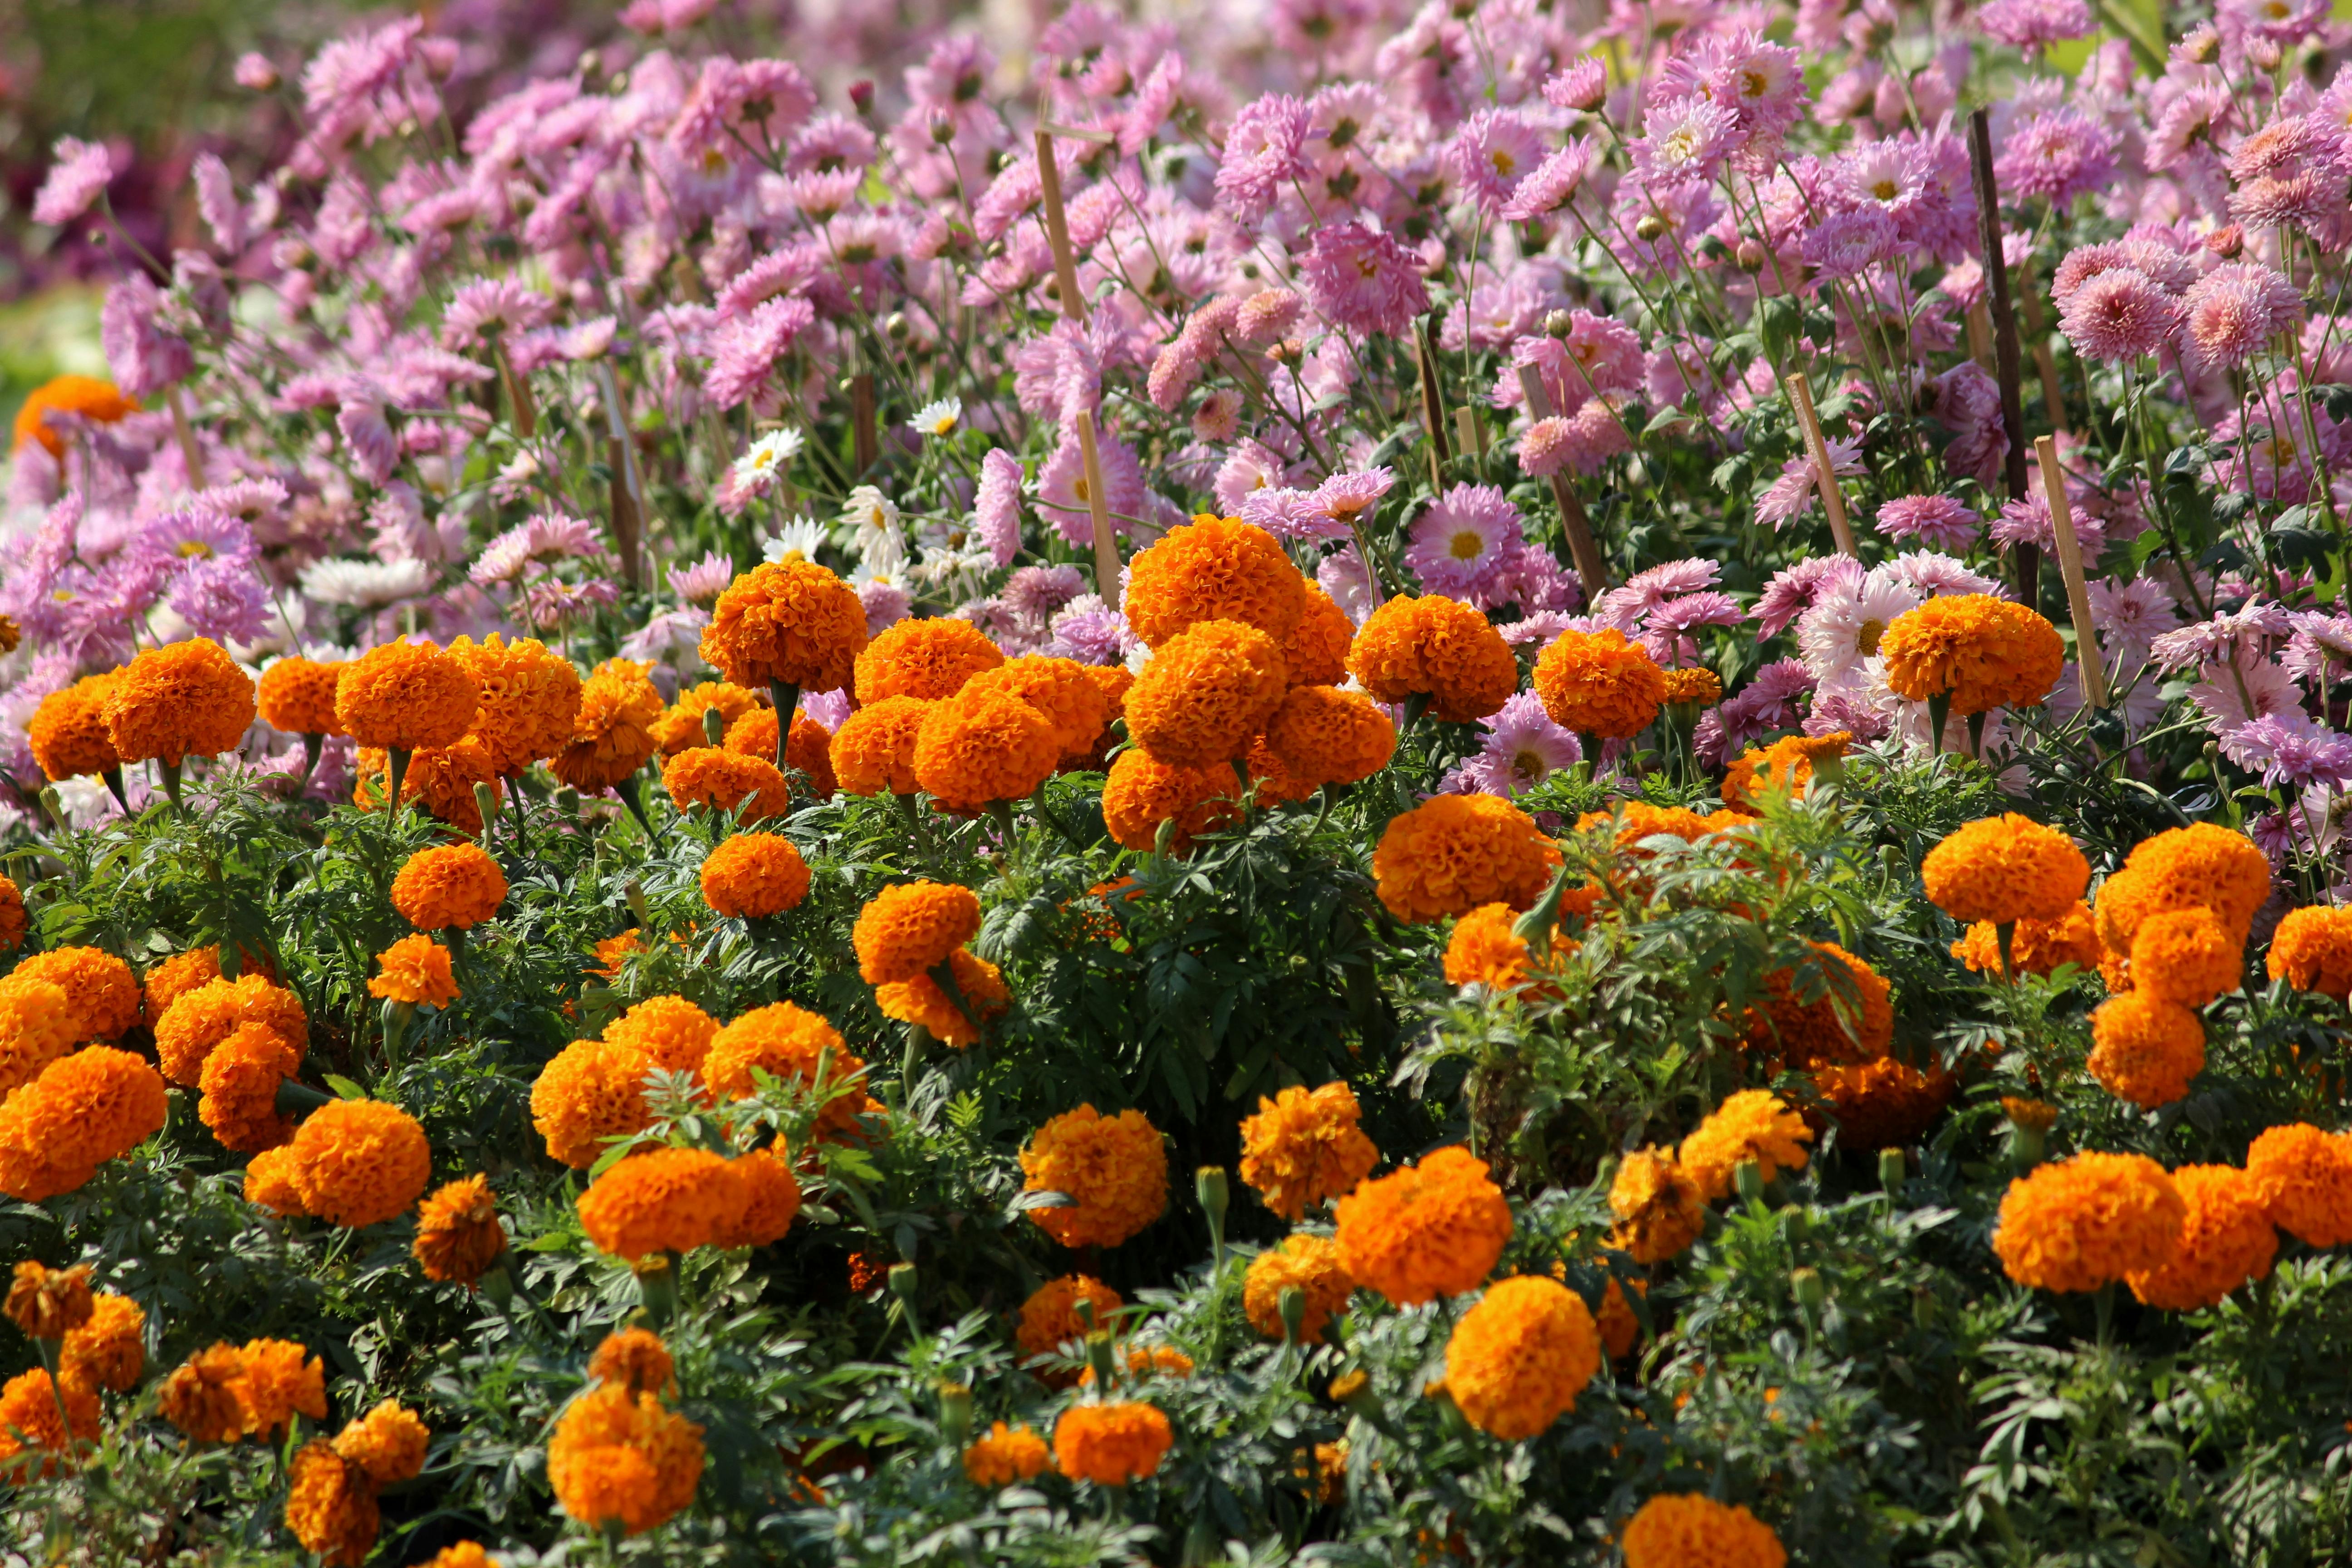 Marigold Photos, Download The BEST Free Marigold Stock Photos & HD Images